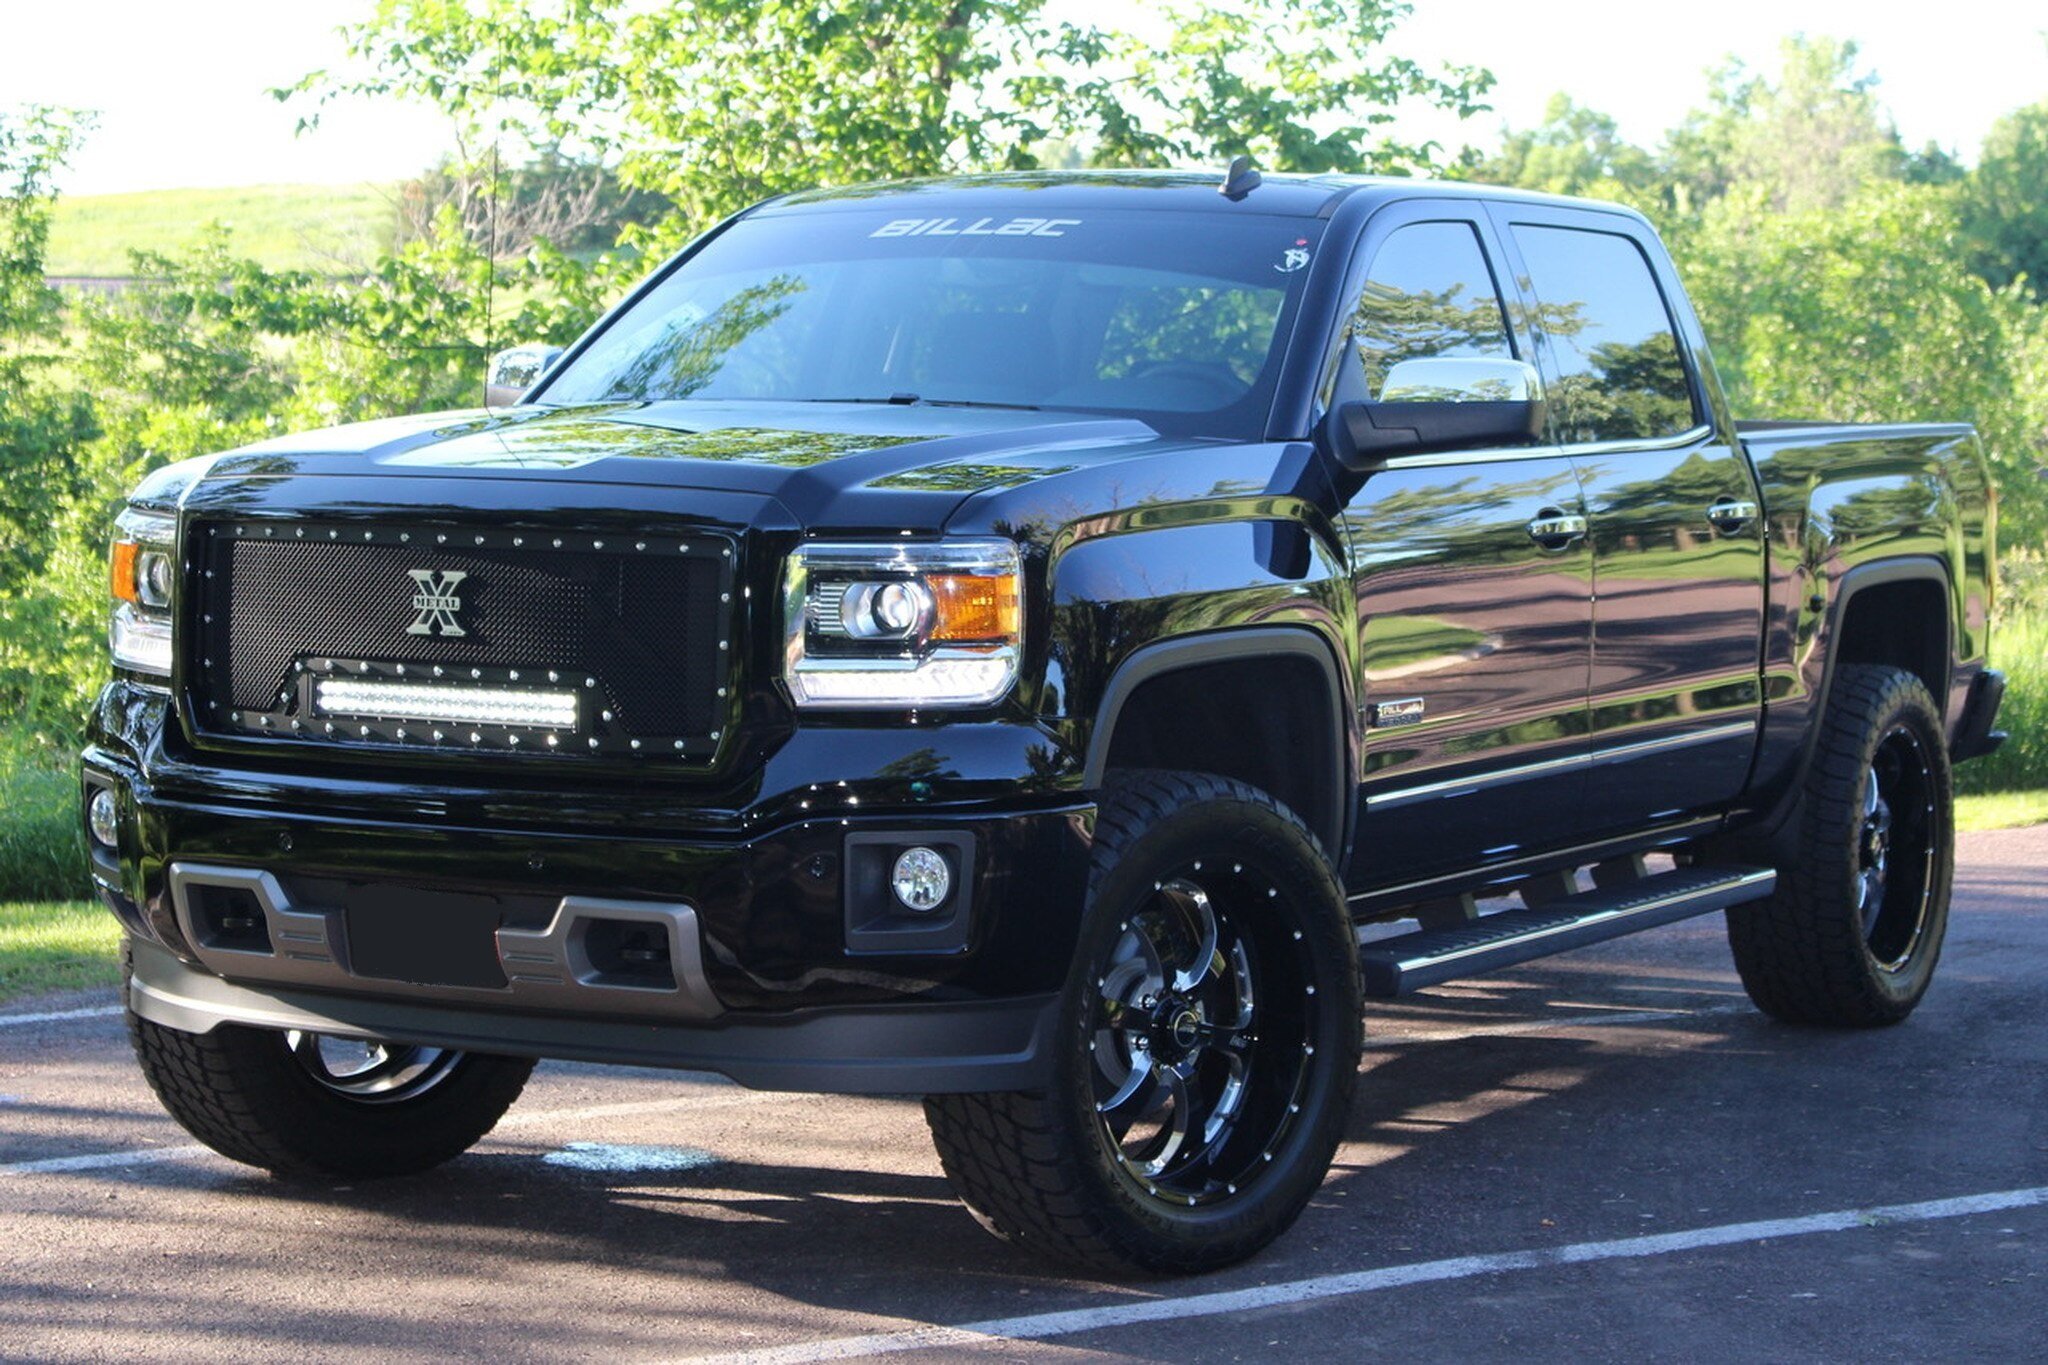  Lifted GMC truck